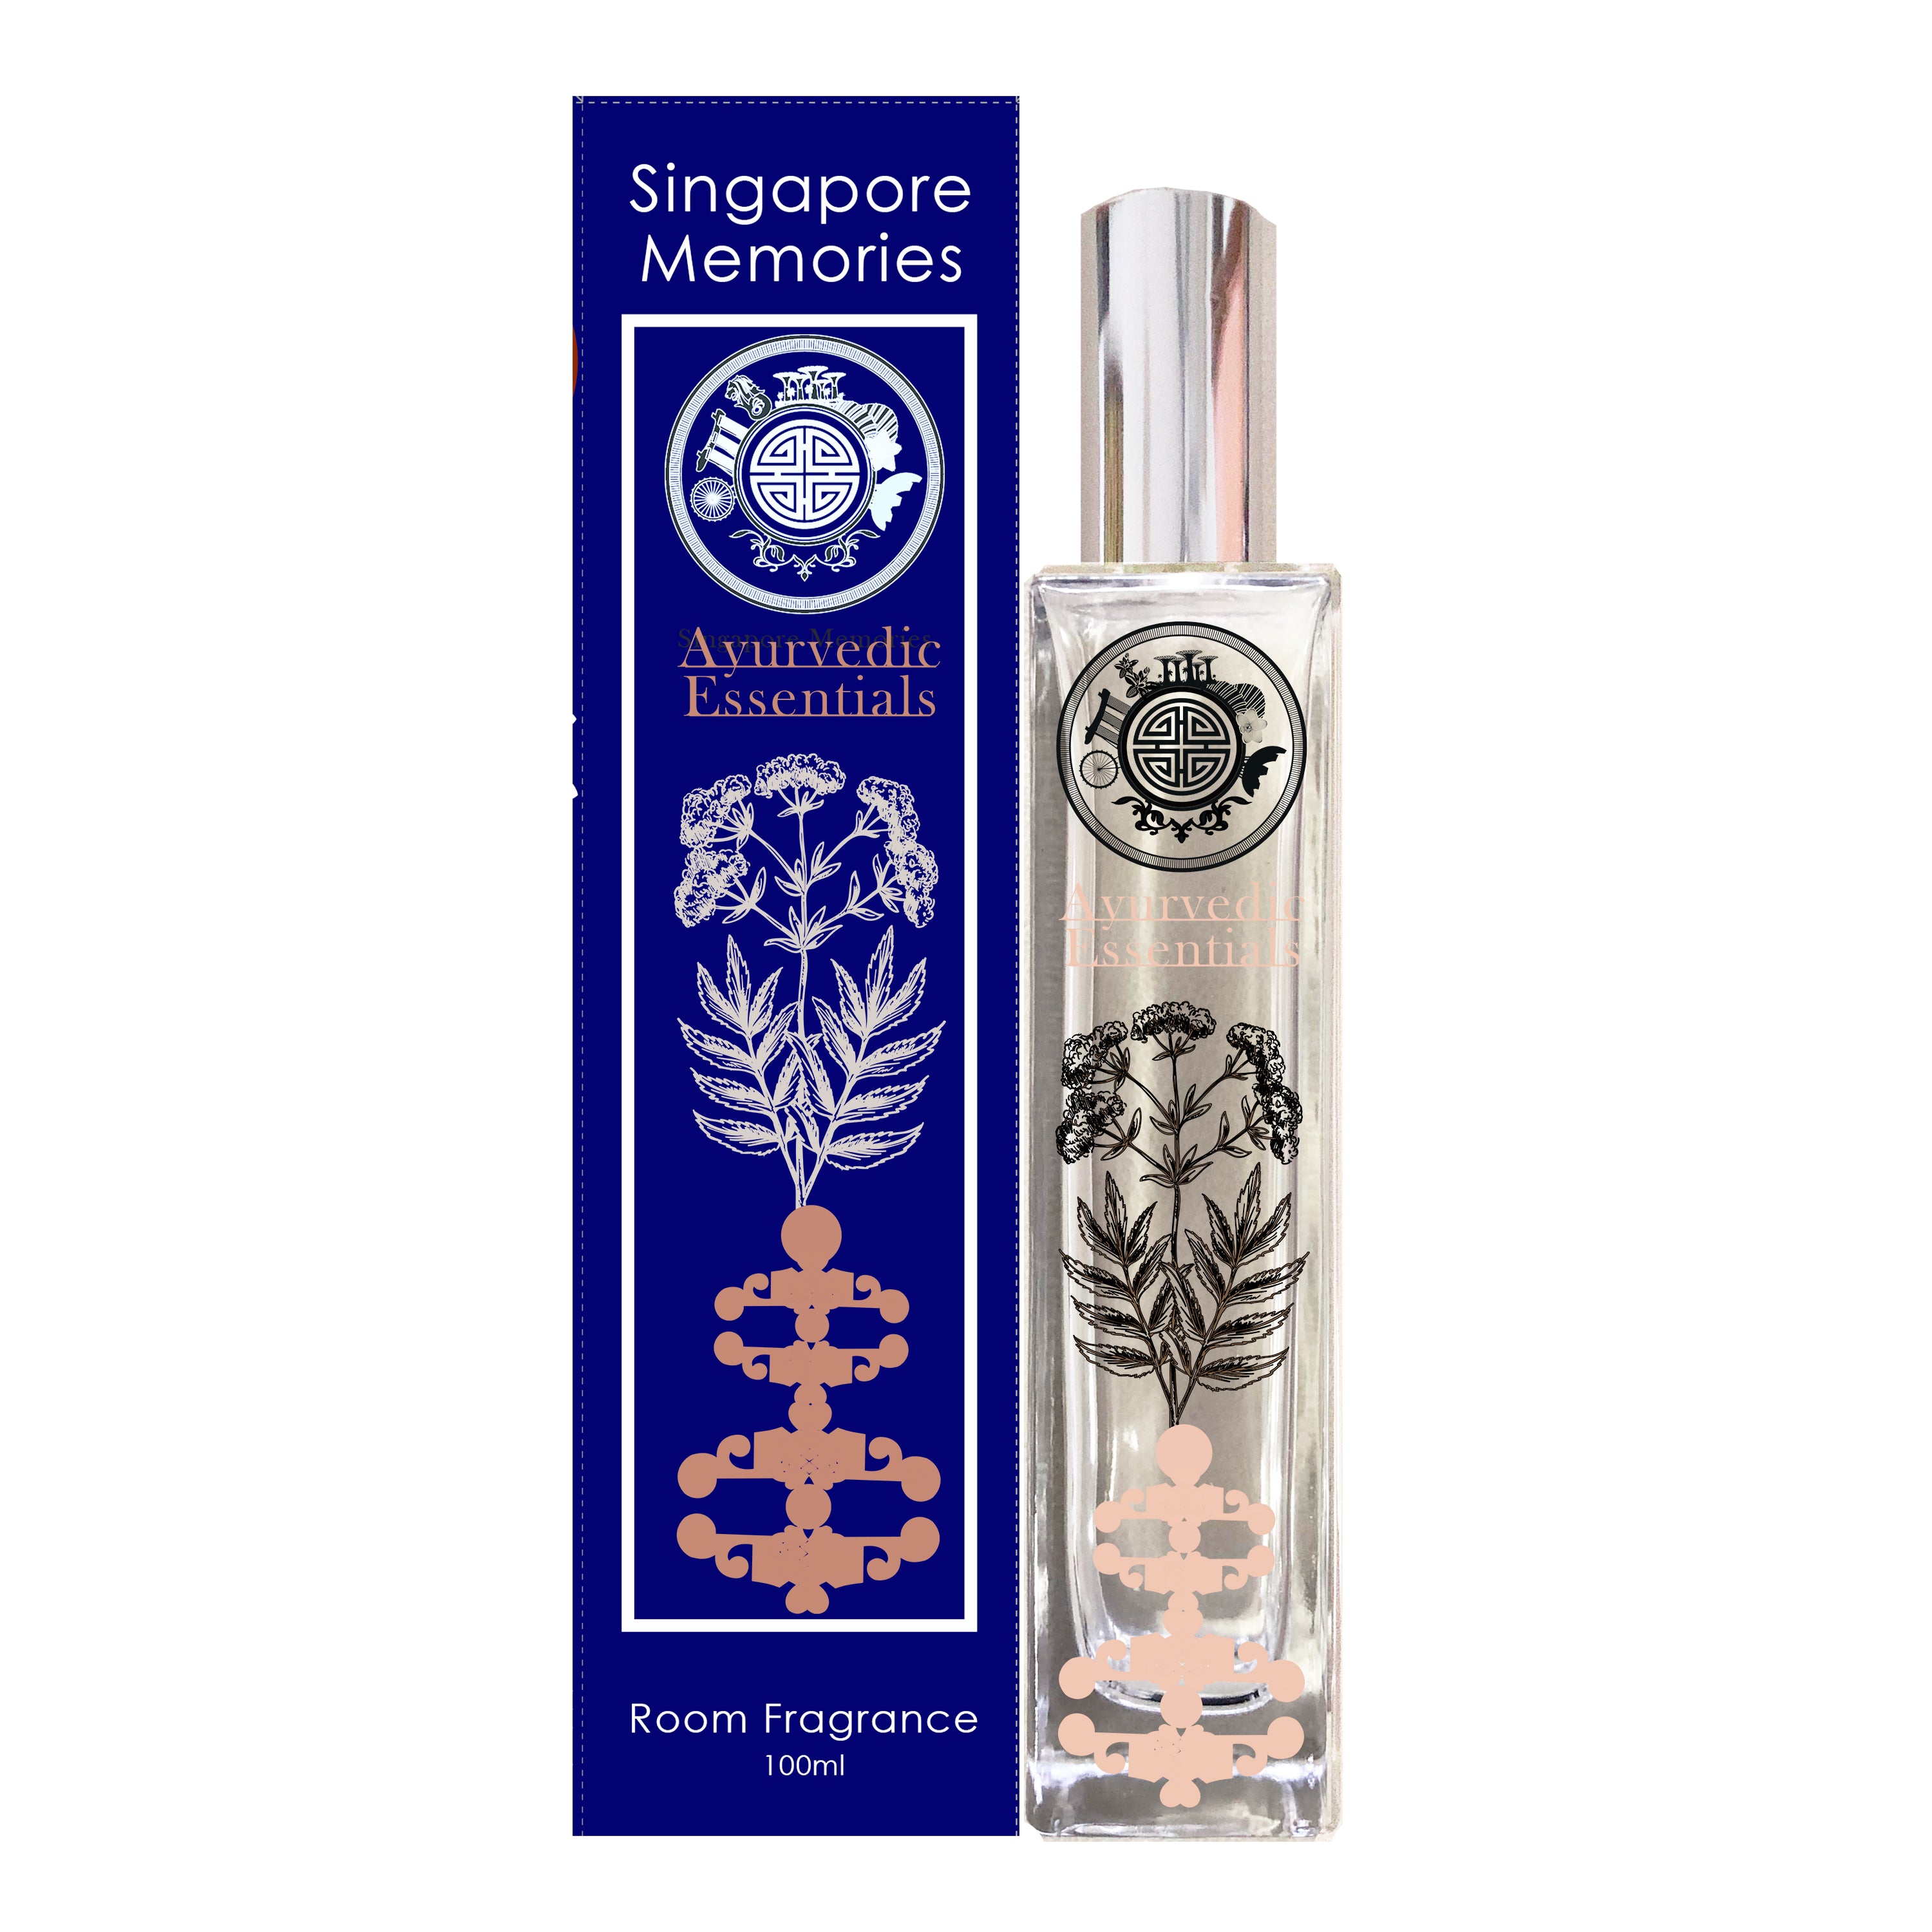 ayurvedic essential singapore memories orchid room scent perfume with essential oils of rare and natural essential aroma oils